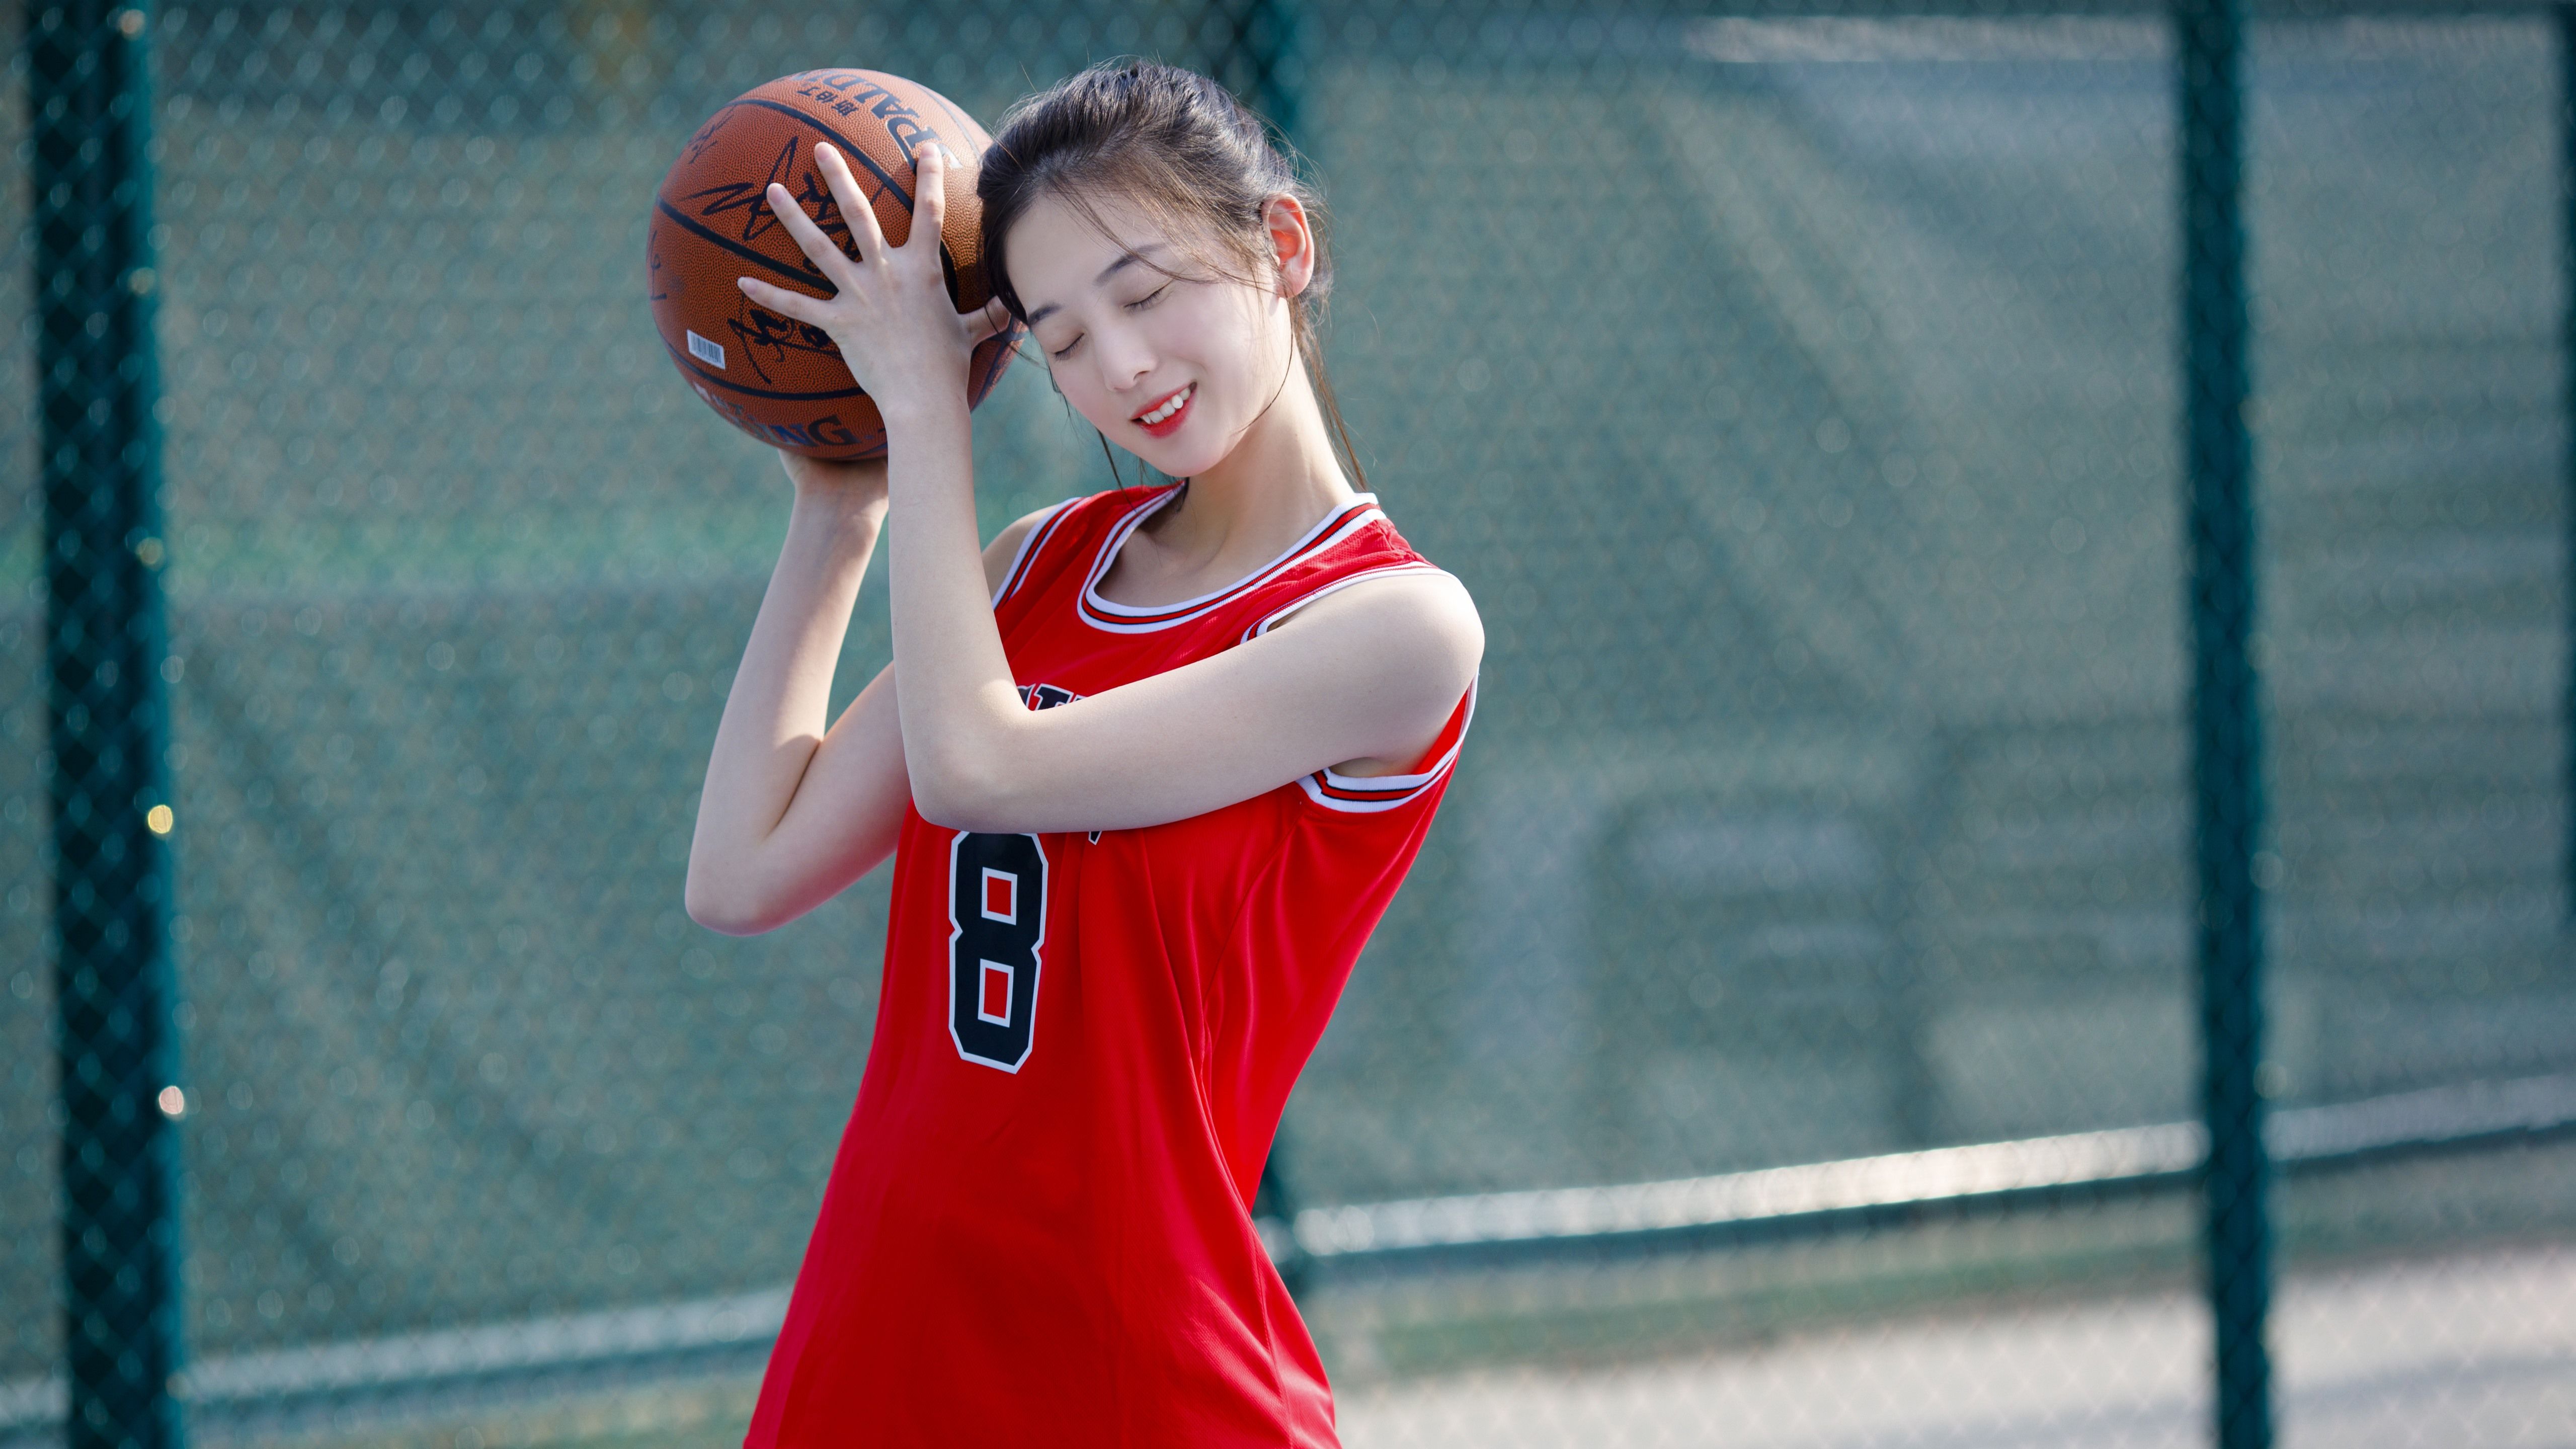 Lovely Young Girl, Basketball, Sport 1242x2688 IPhone 11 Pro XS